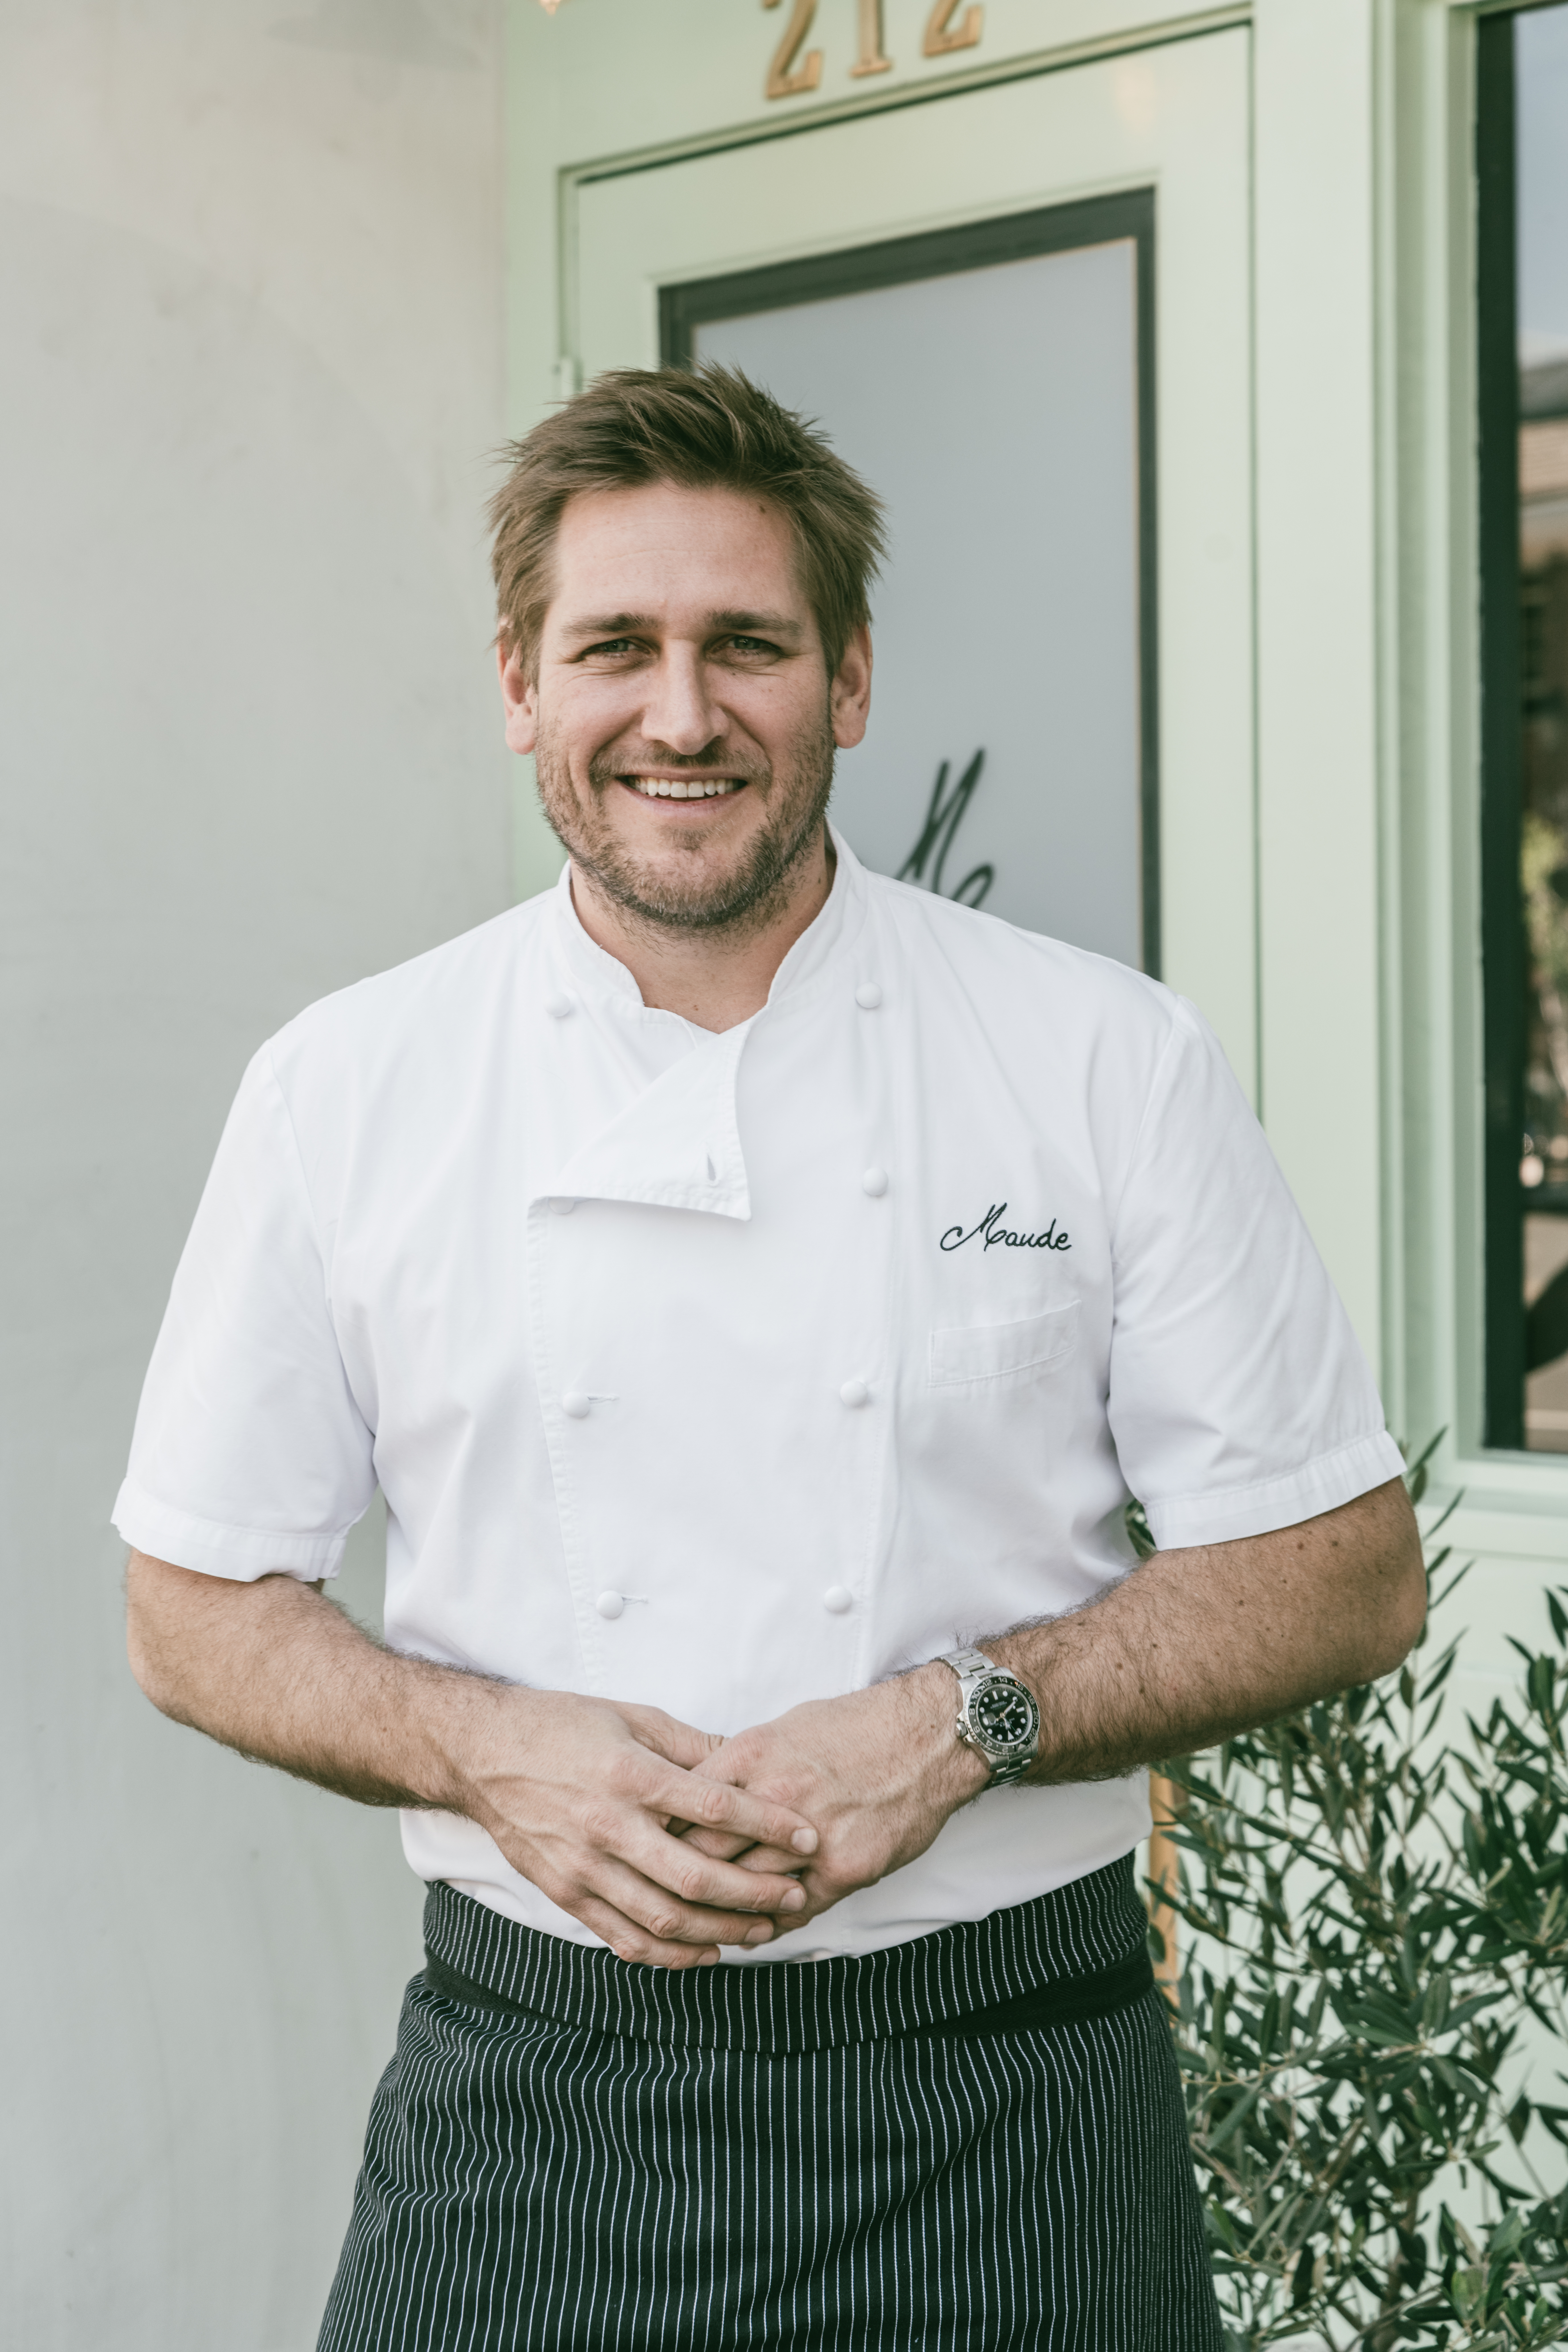 Chef Curtis Stone